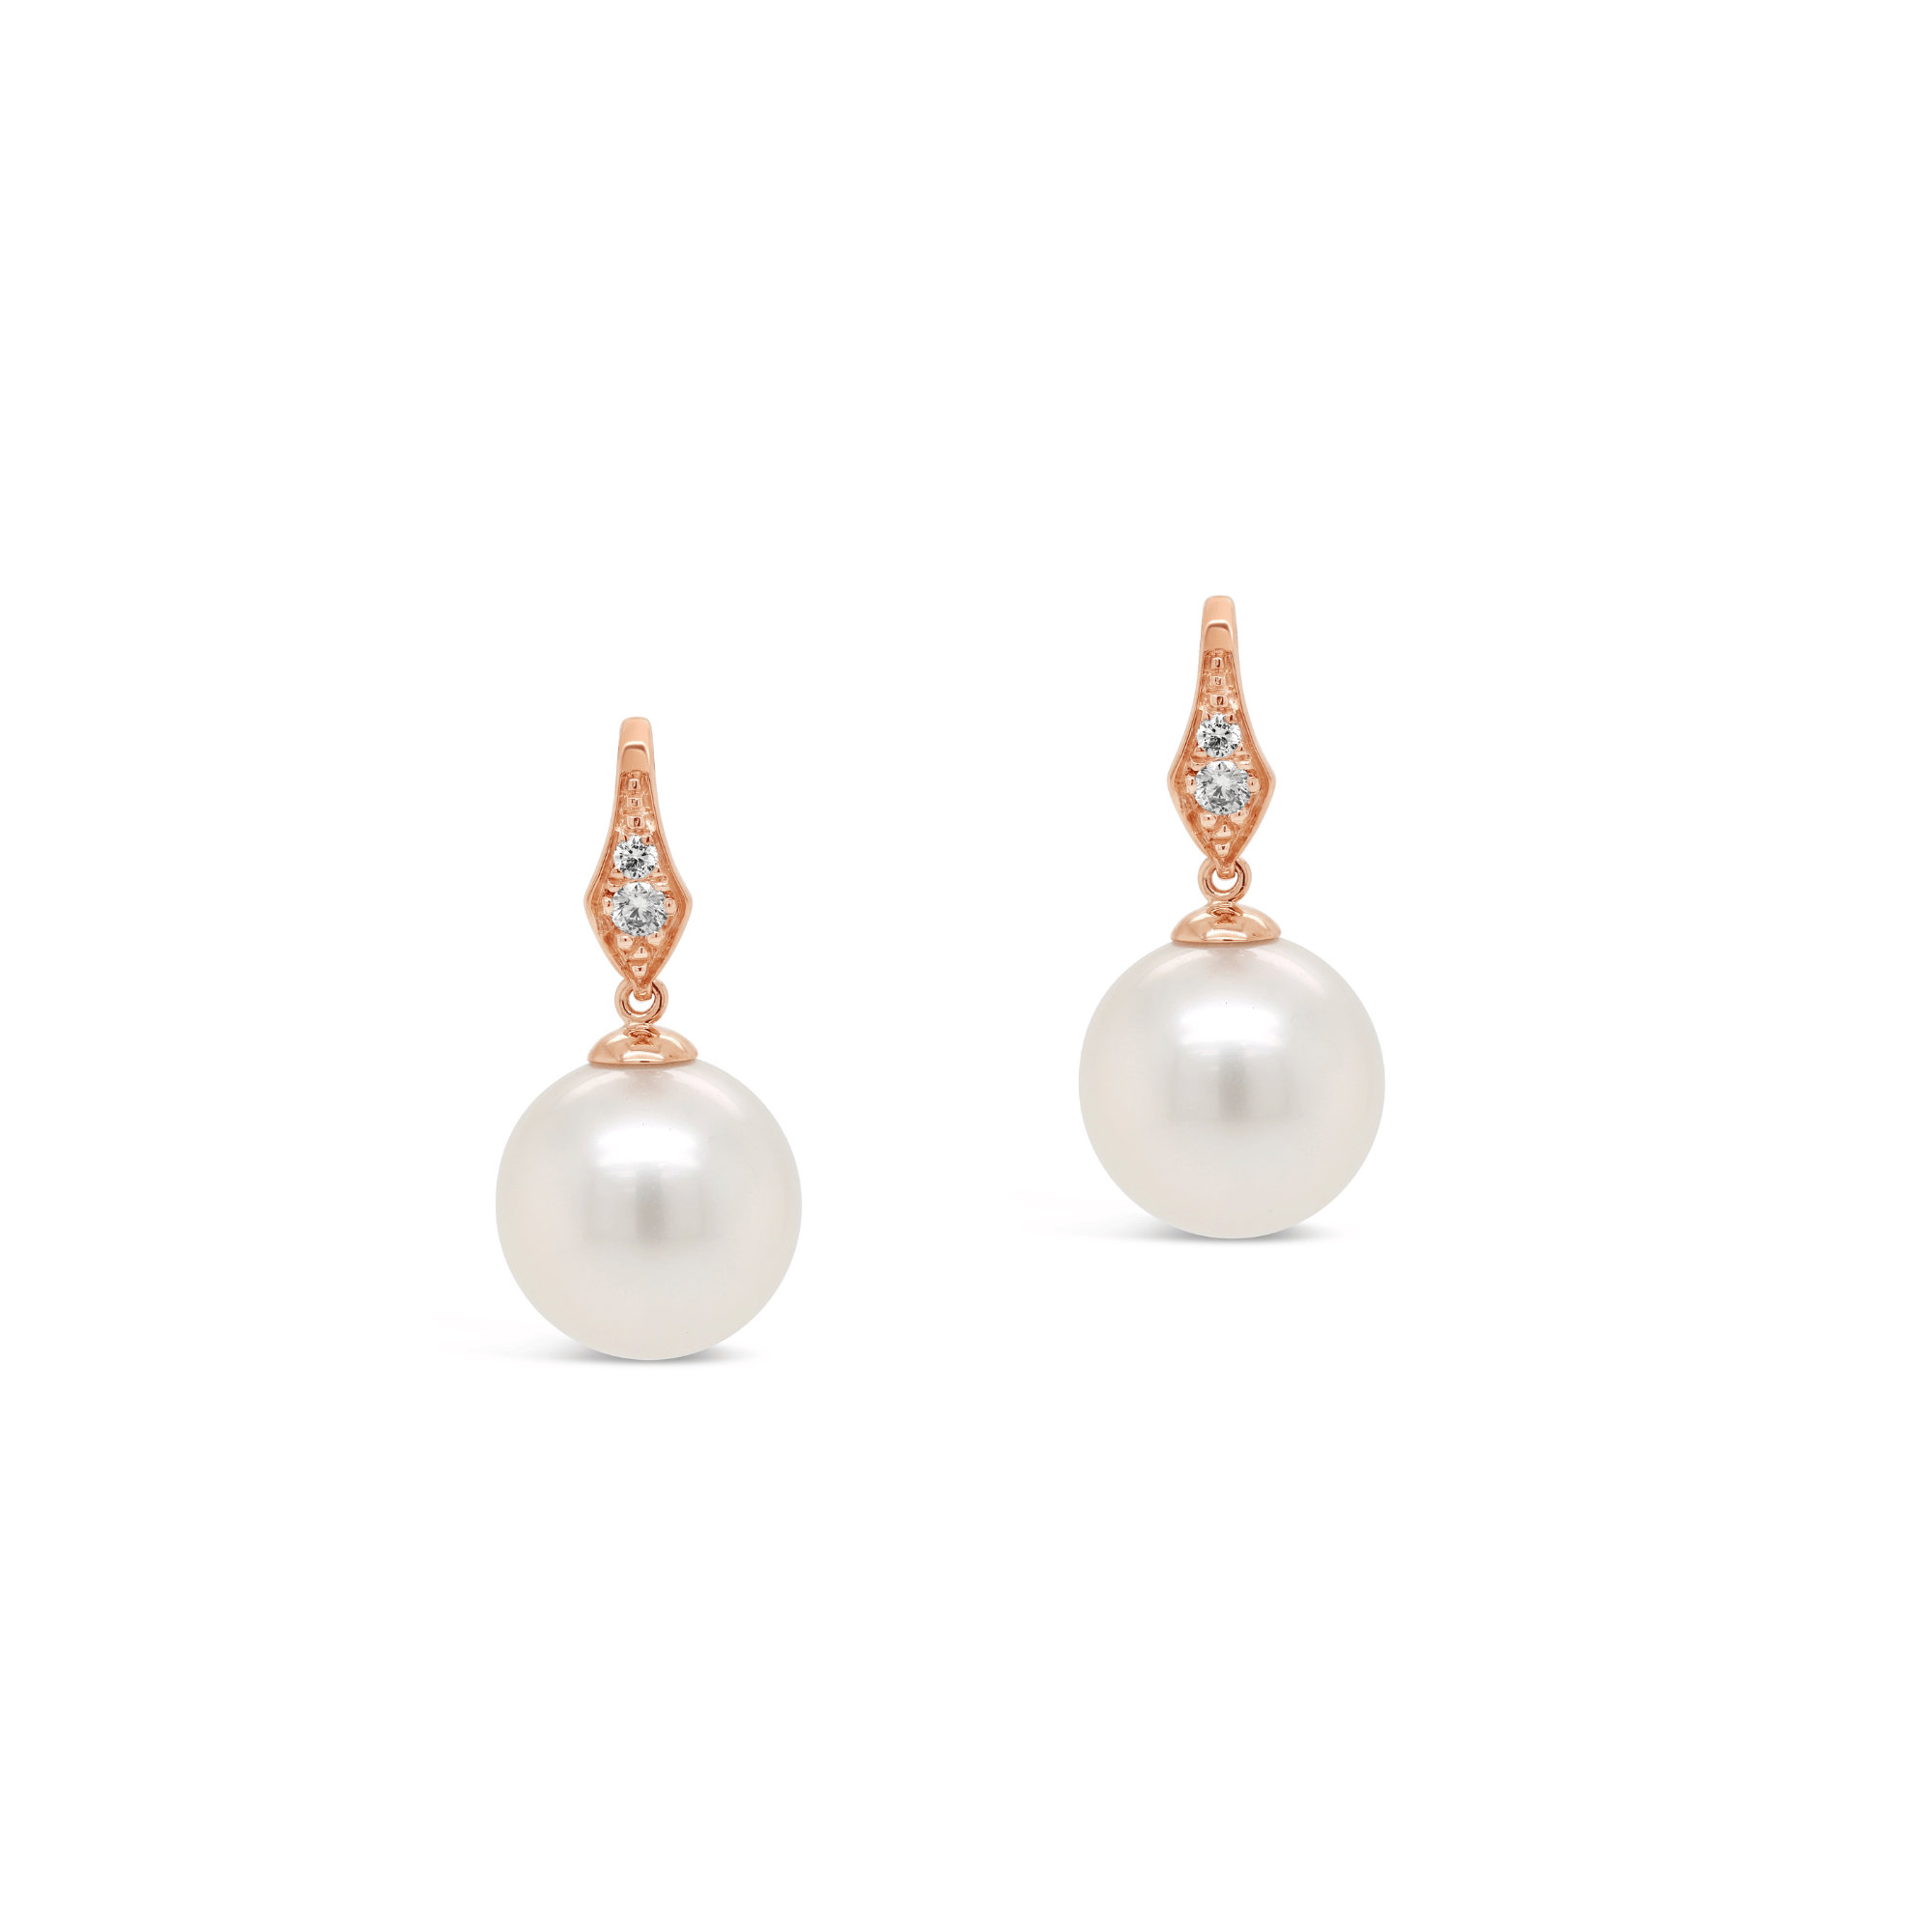 Diamond and South Sea pearl earrings in rose gold